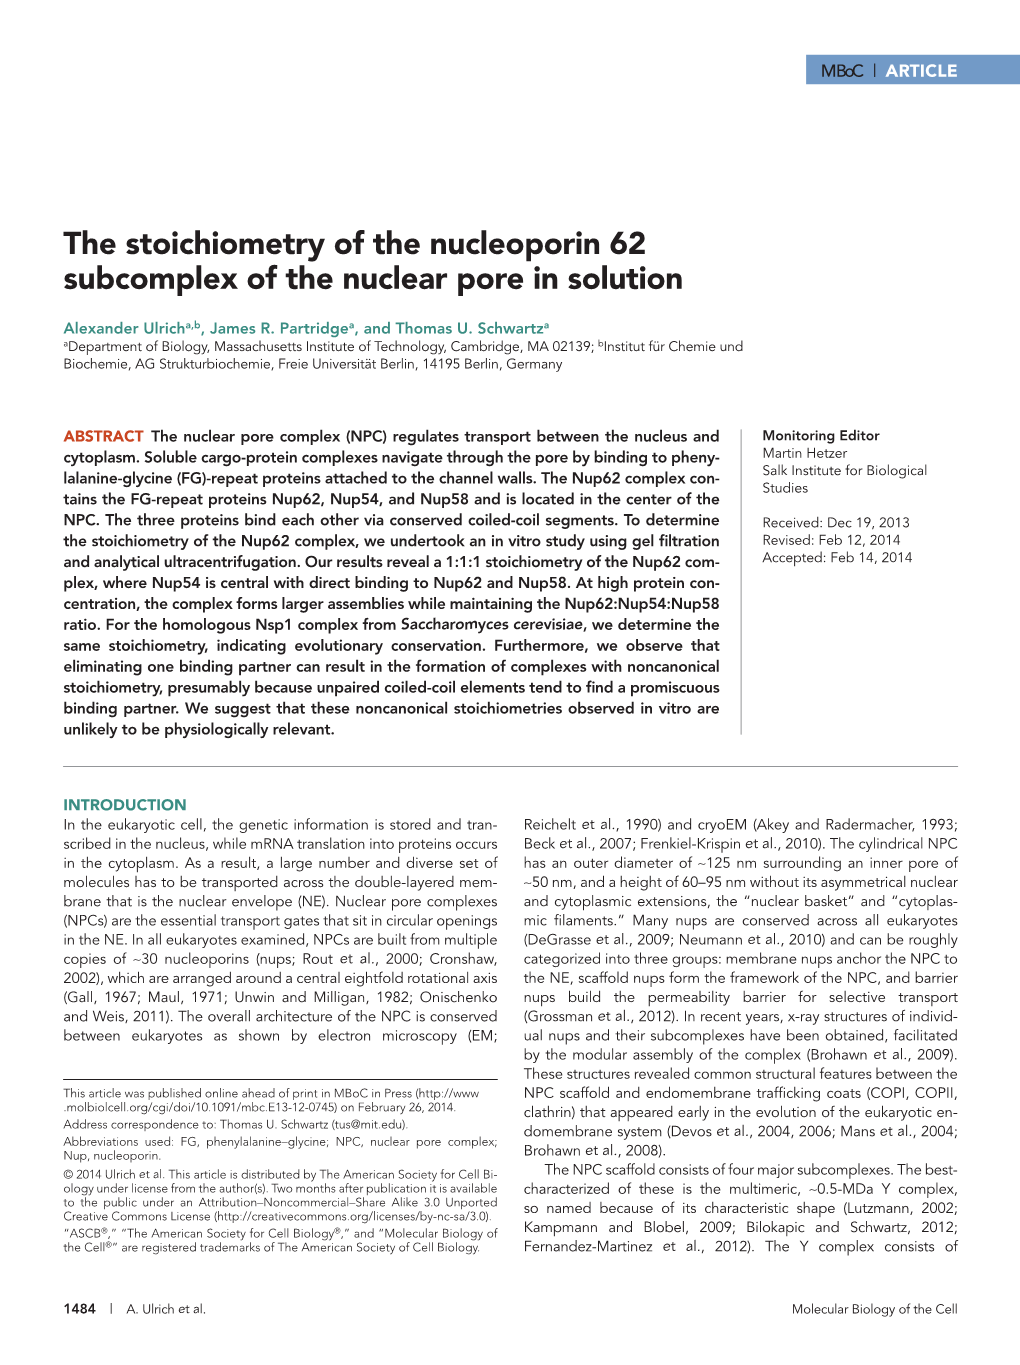 The Stoichiometry of the Nucleoporin 62 Subcomplex of the Nuclear Pore in Solution